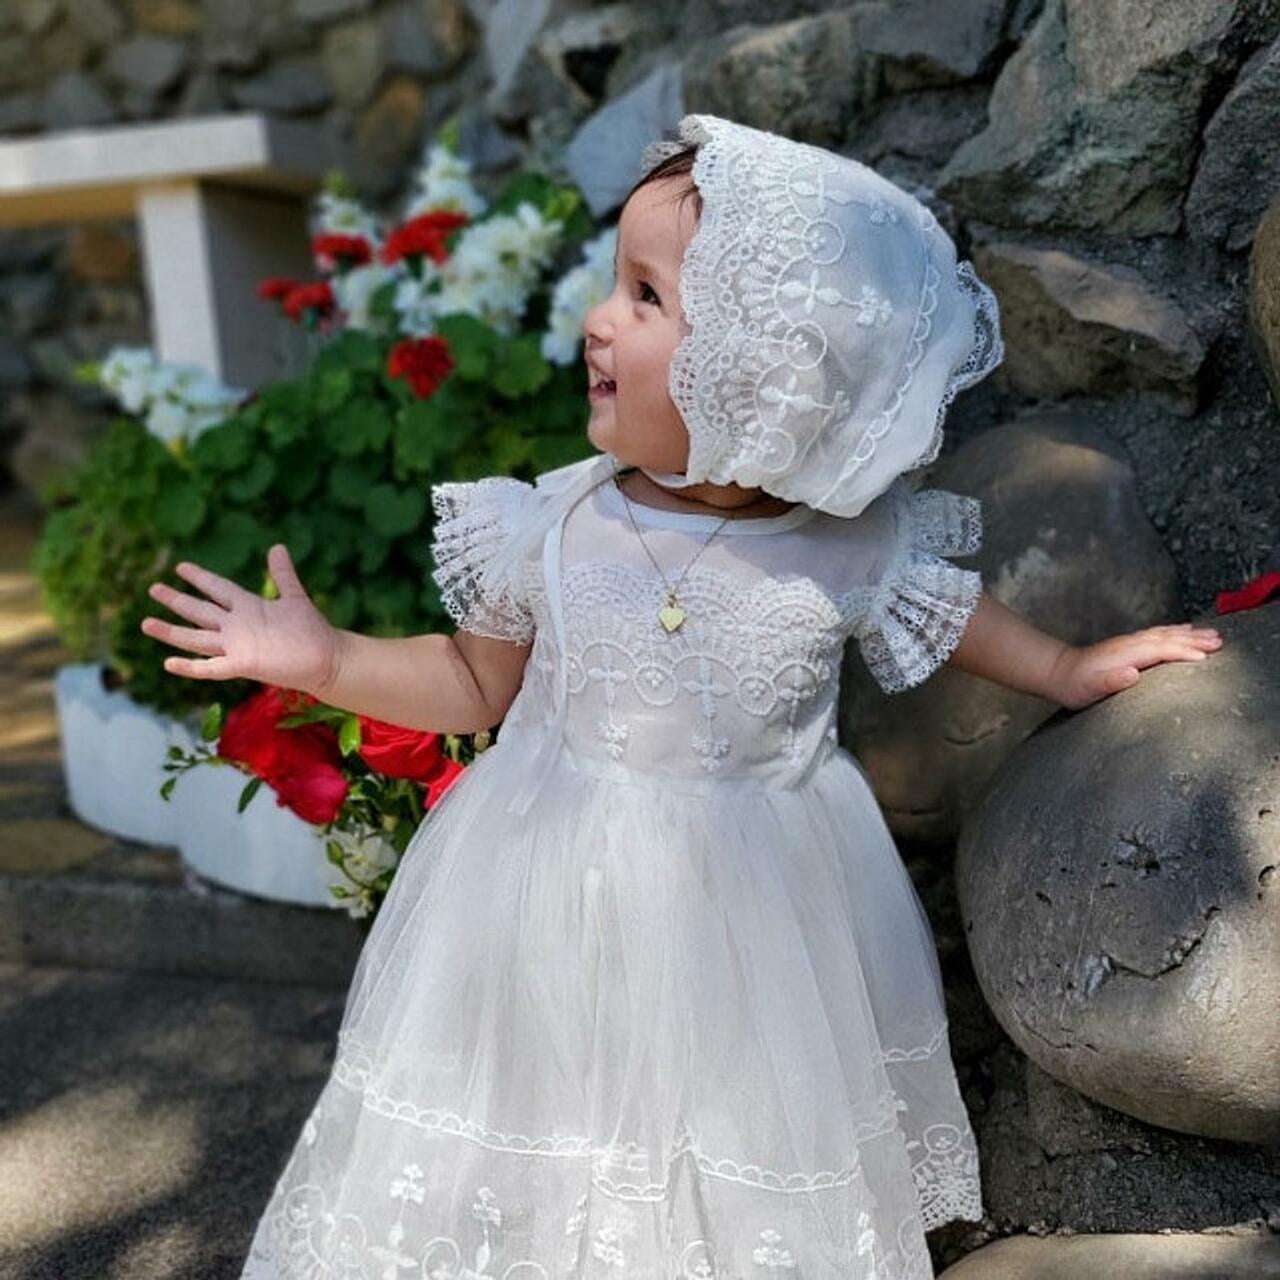 BABY GIRLS CHRISTENING DRESS FLOWER GIRL BRIDESMAID PARTY WHITE/IVORY GOWN 